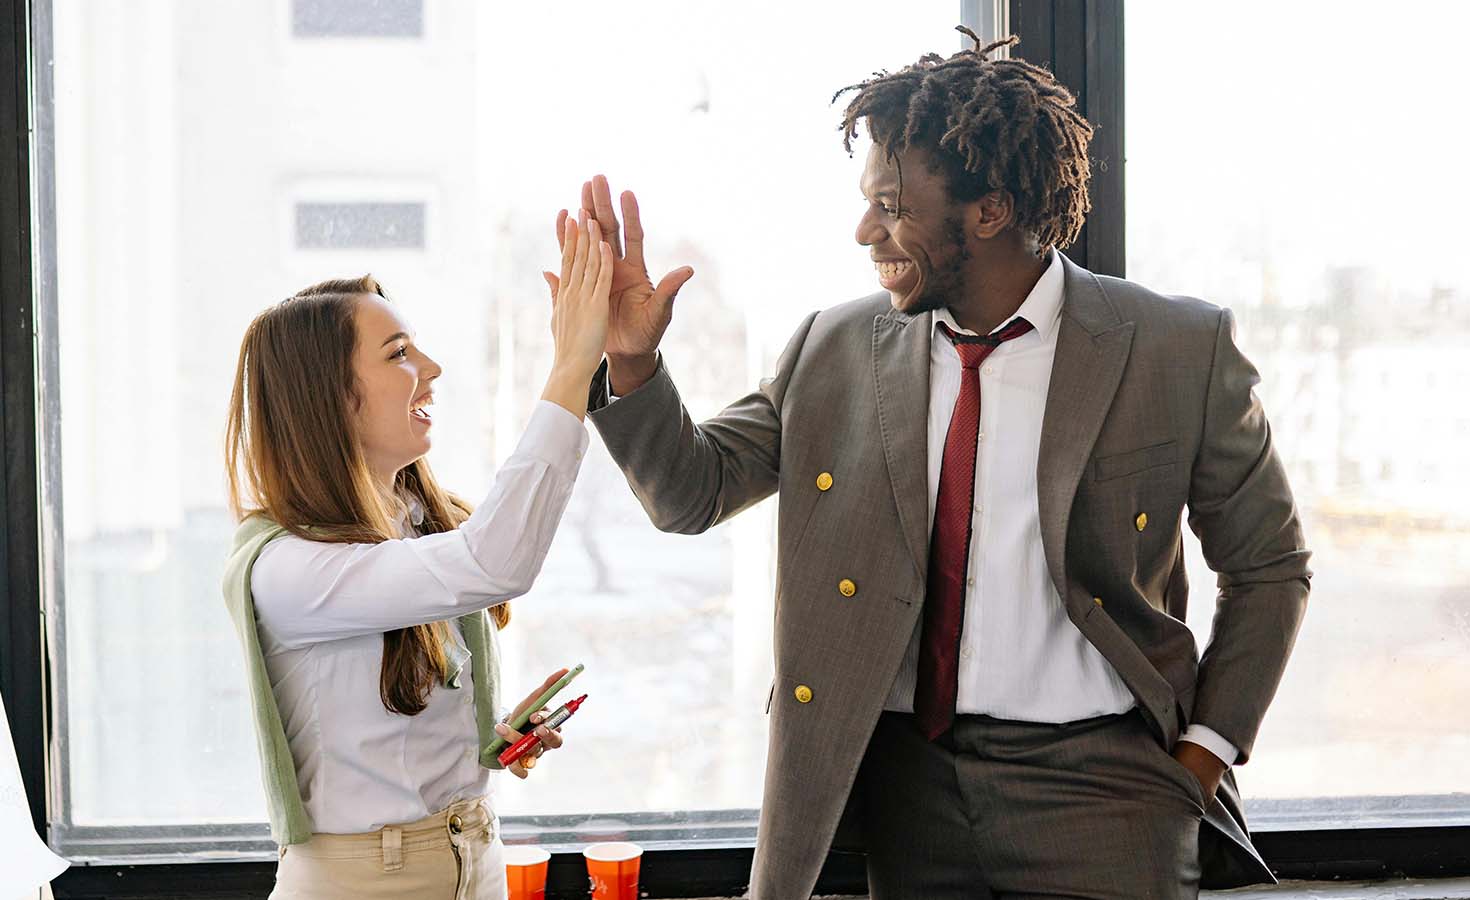 Man and woman in an office giving a high five to each other